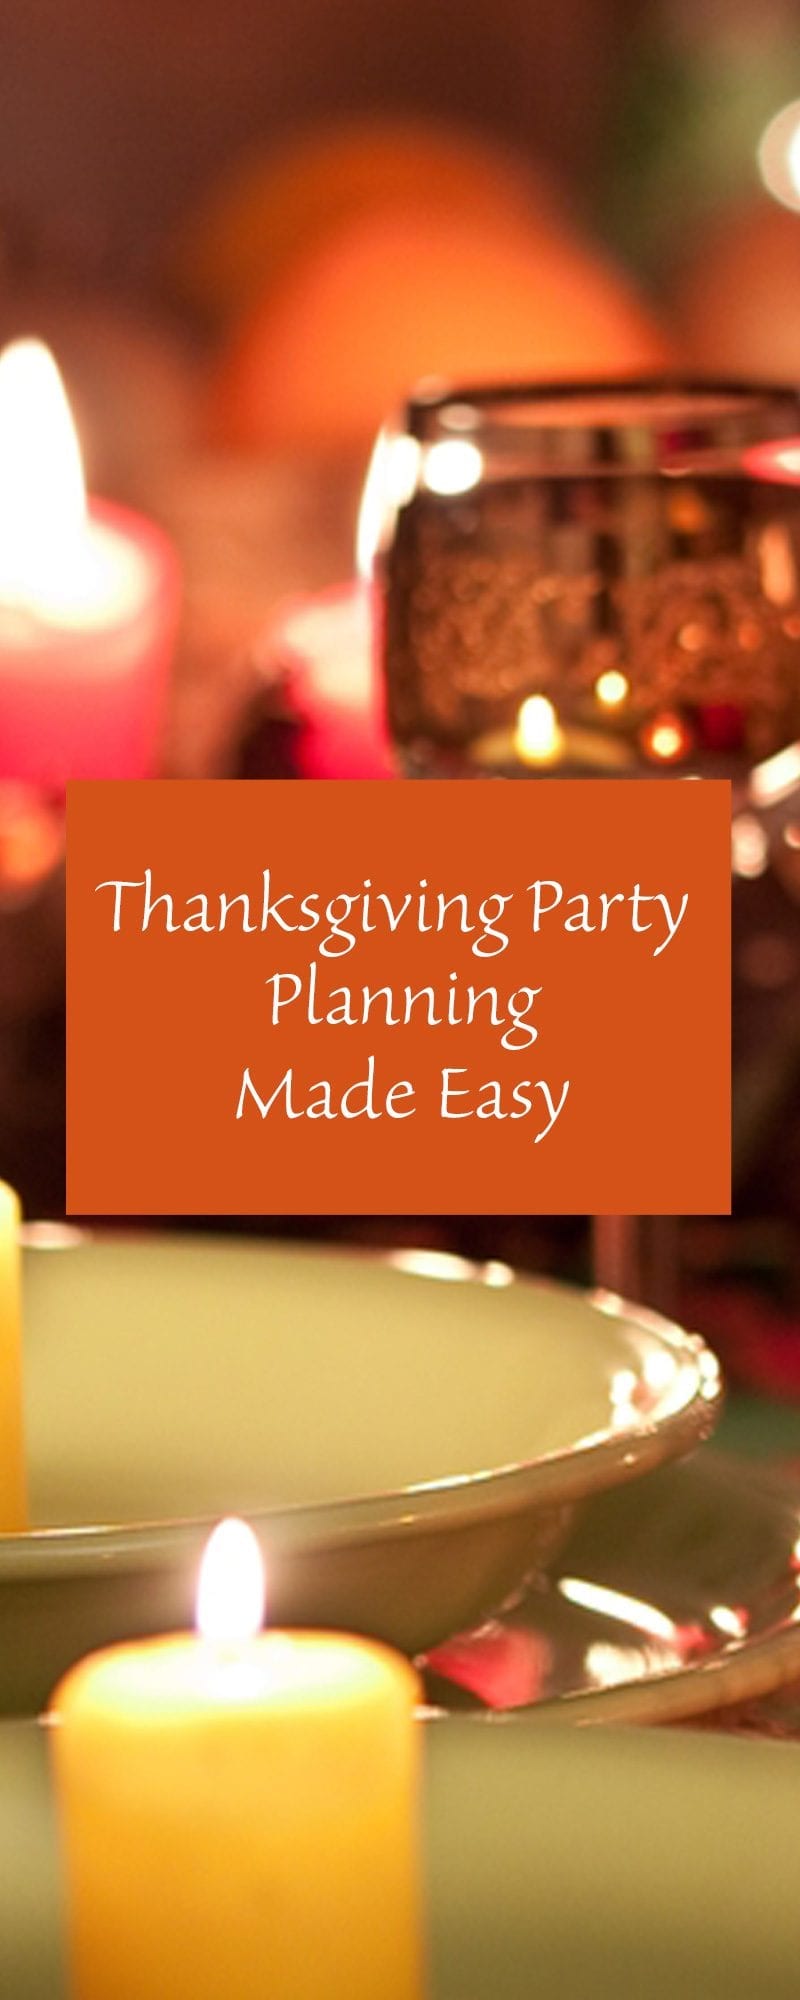 Thanksgiving Party Planning Tips Made Easy